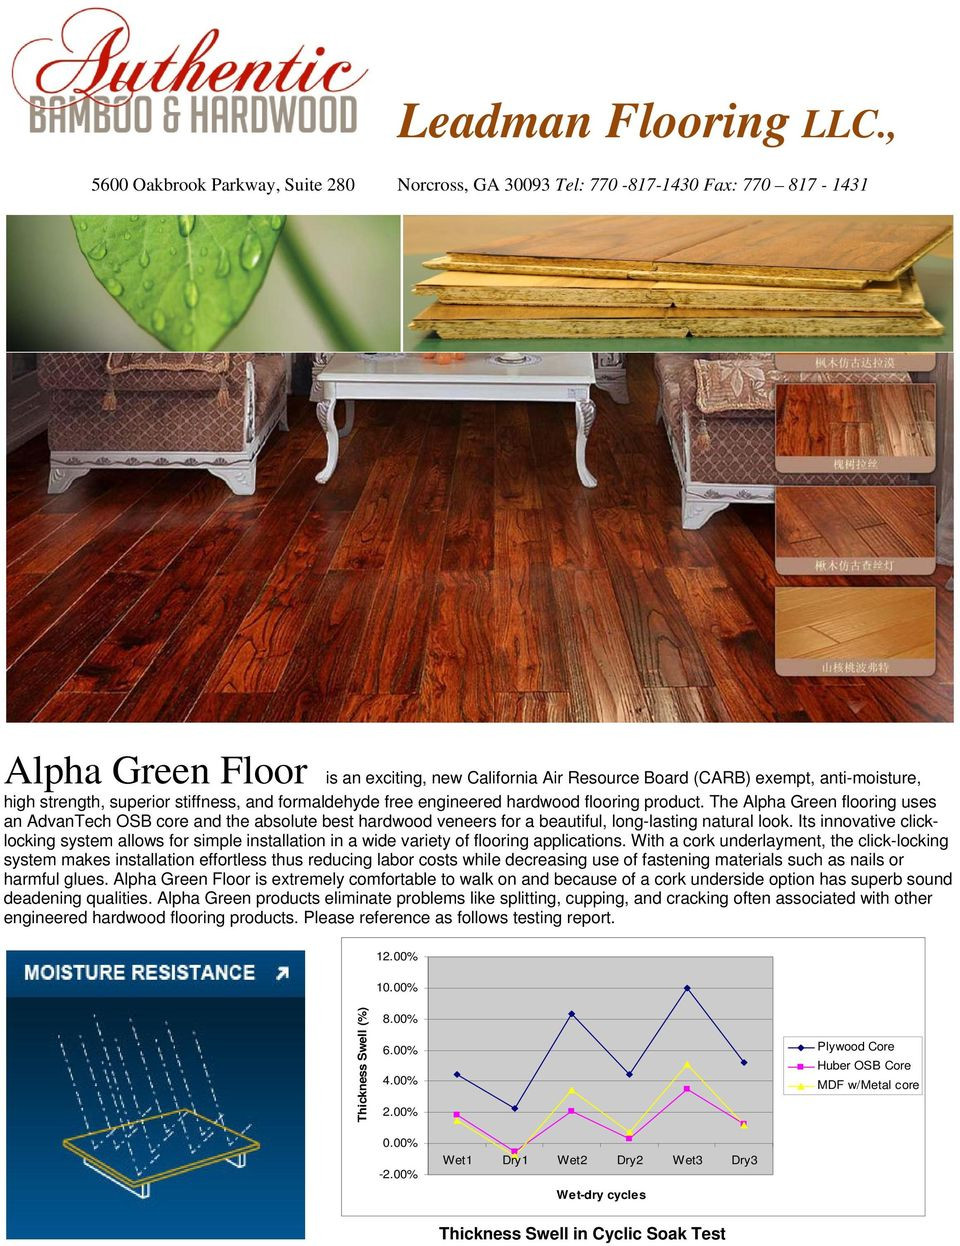 16 attractive A and C Hardwood Floor Refinishing Company 2024 free download a and c hardwood floor refinishing company of leadman flooring llc pdf intended for strength superior stiffness and formaldehyde free engineered hardwood flooring product